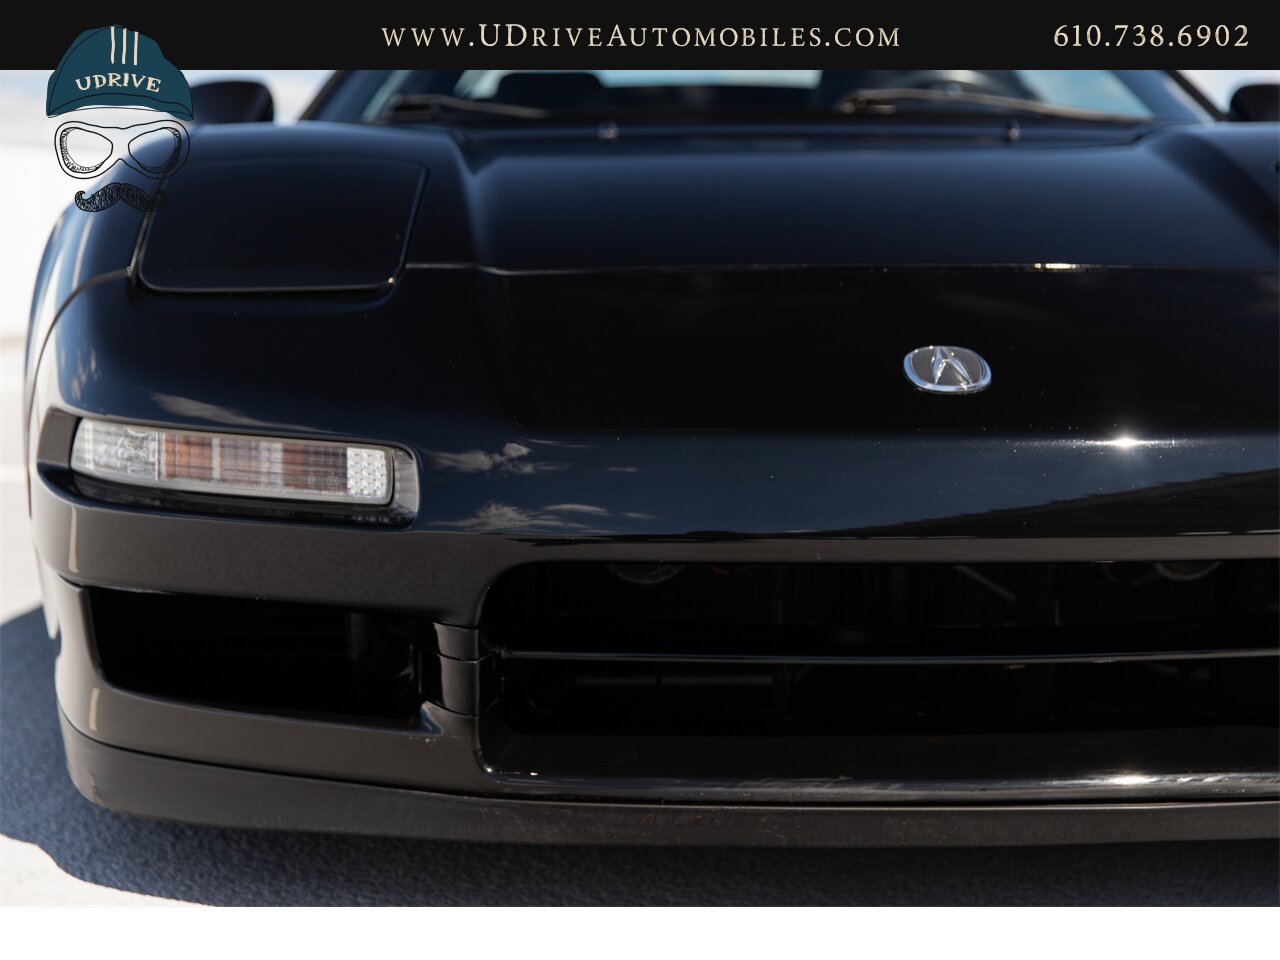 1996 Acura NSX NSX-T  5 Speed Manual Fresh Timing Belt Service - Photo 17 - West Chester, PA 19382